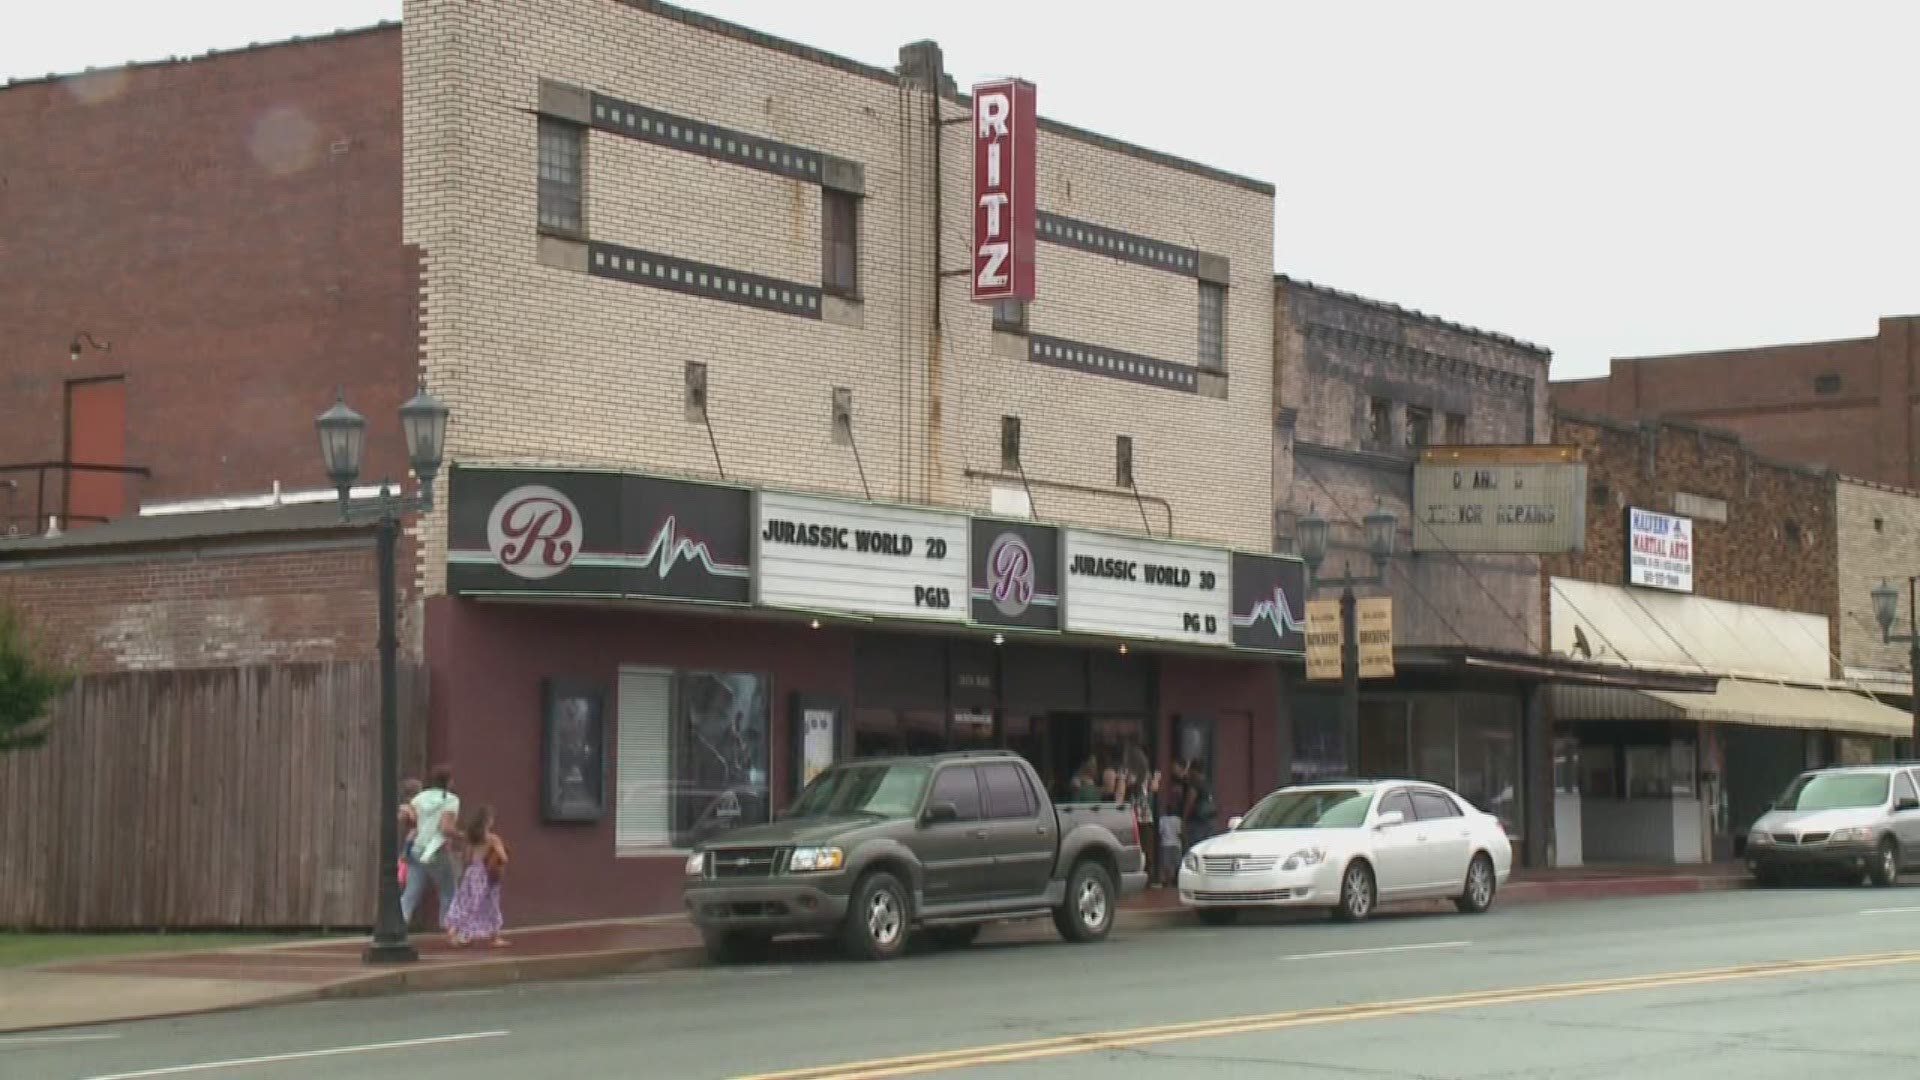 Some sad news for the community of Malvern this week. The owners of the Ritz Theatre are moving on.